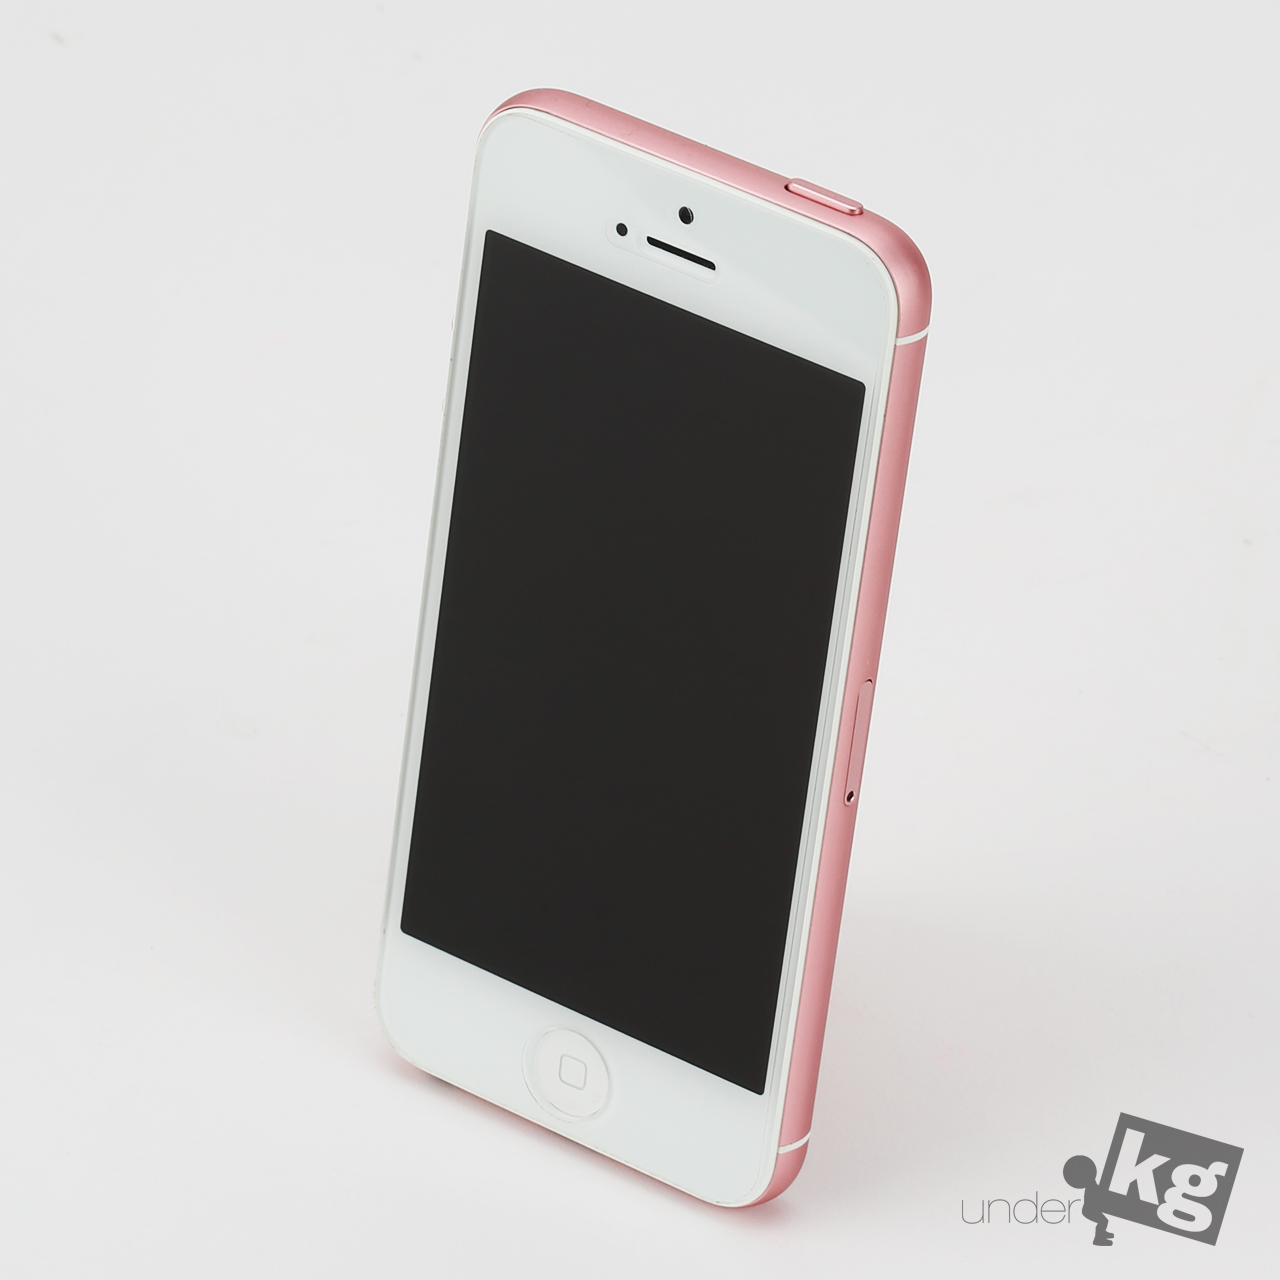 iphone5-to-iphone6-housing-change-pic1.jpg